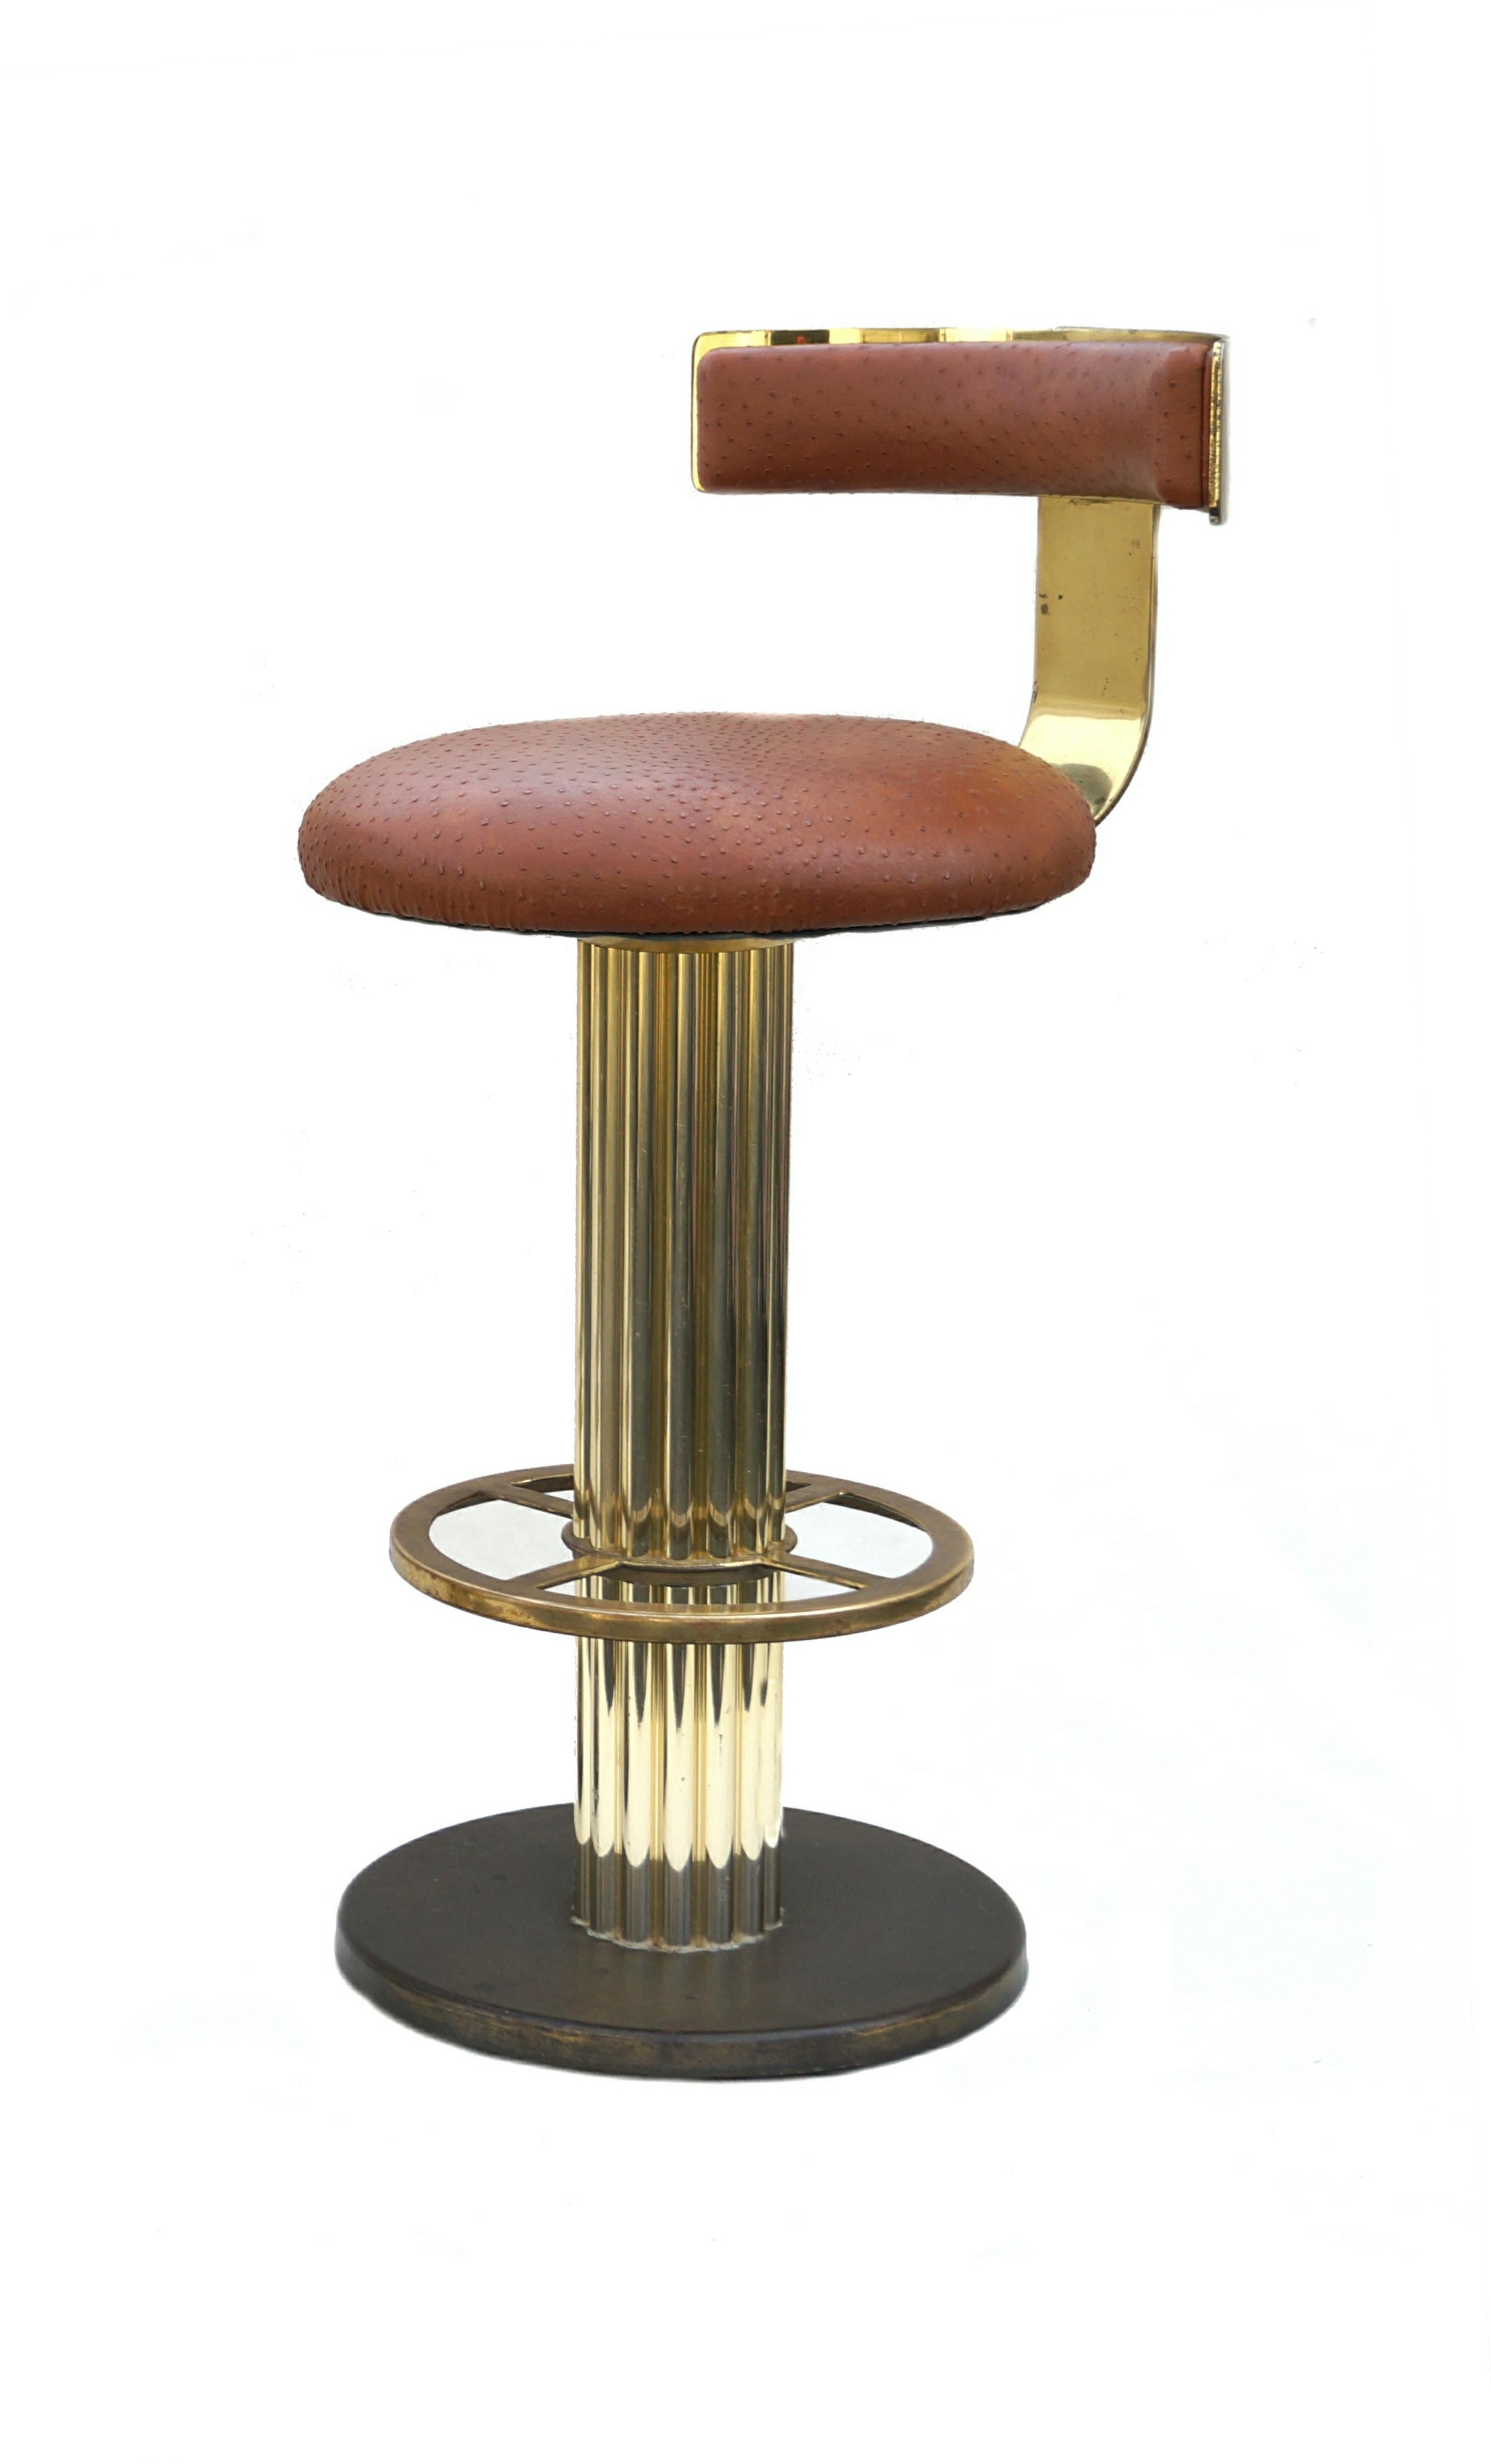 Modern Design For Leisure Ostrich Brass Bar Stools Set of 3 Barstool In Good Condition For Sale In Wayne, NJ